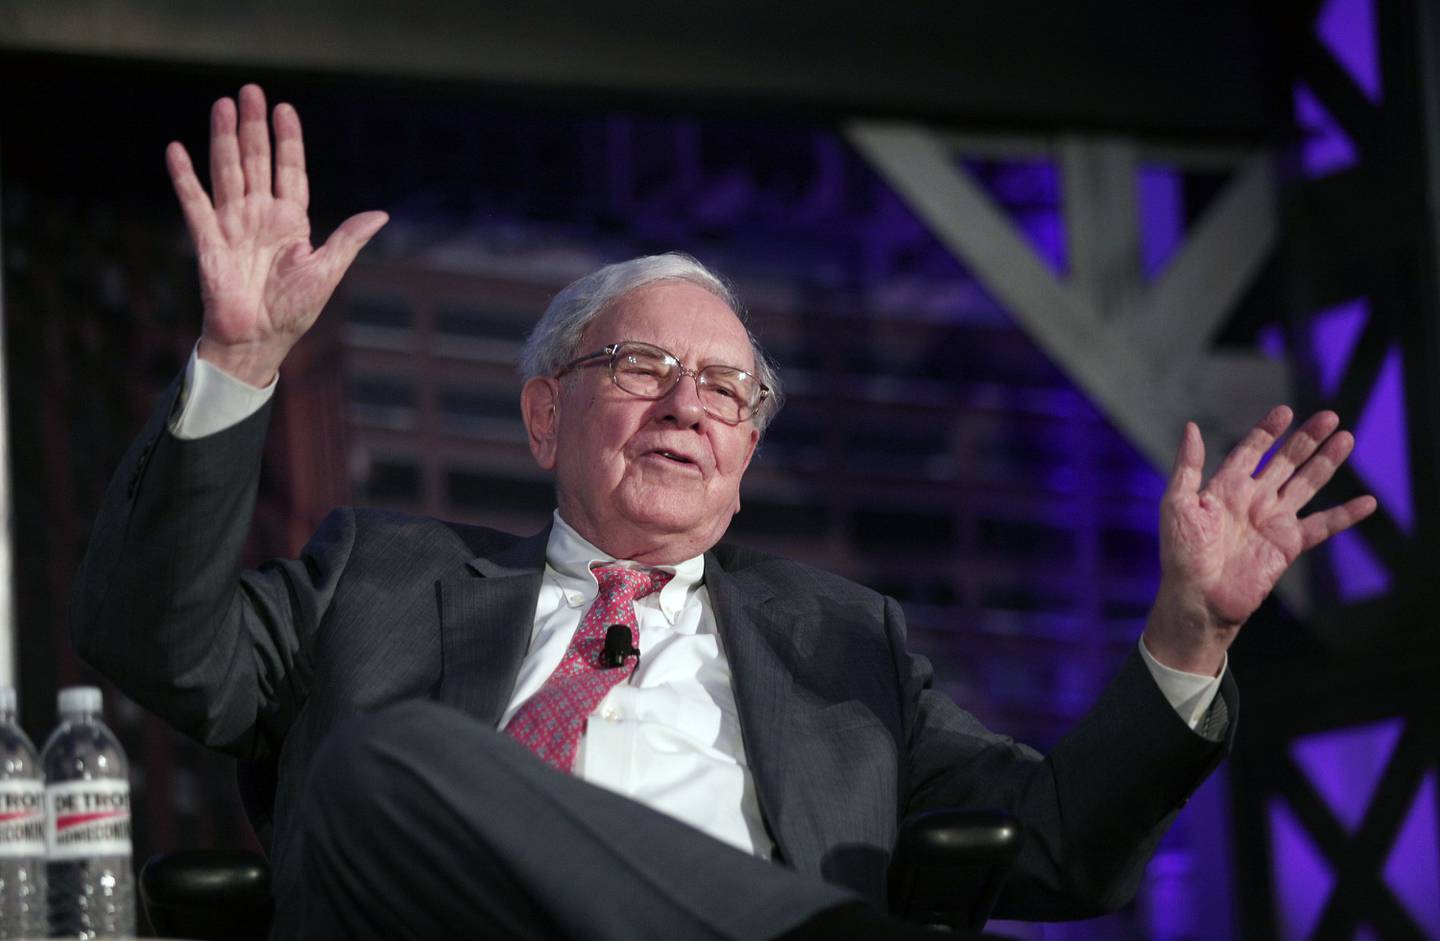 The billionaire's Berkshire Hathaway Inc. is one of the main investors in StoneCo.